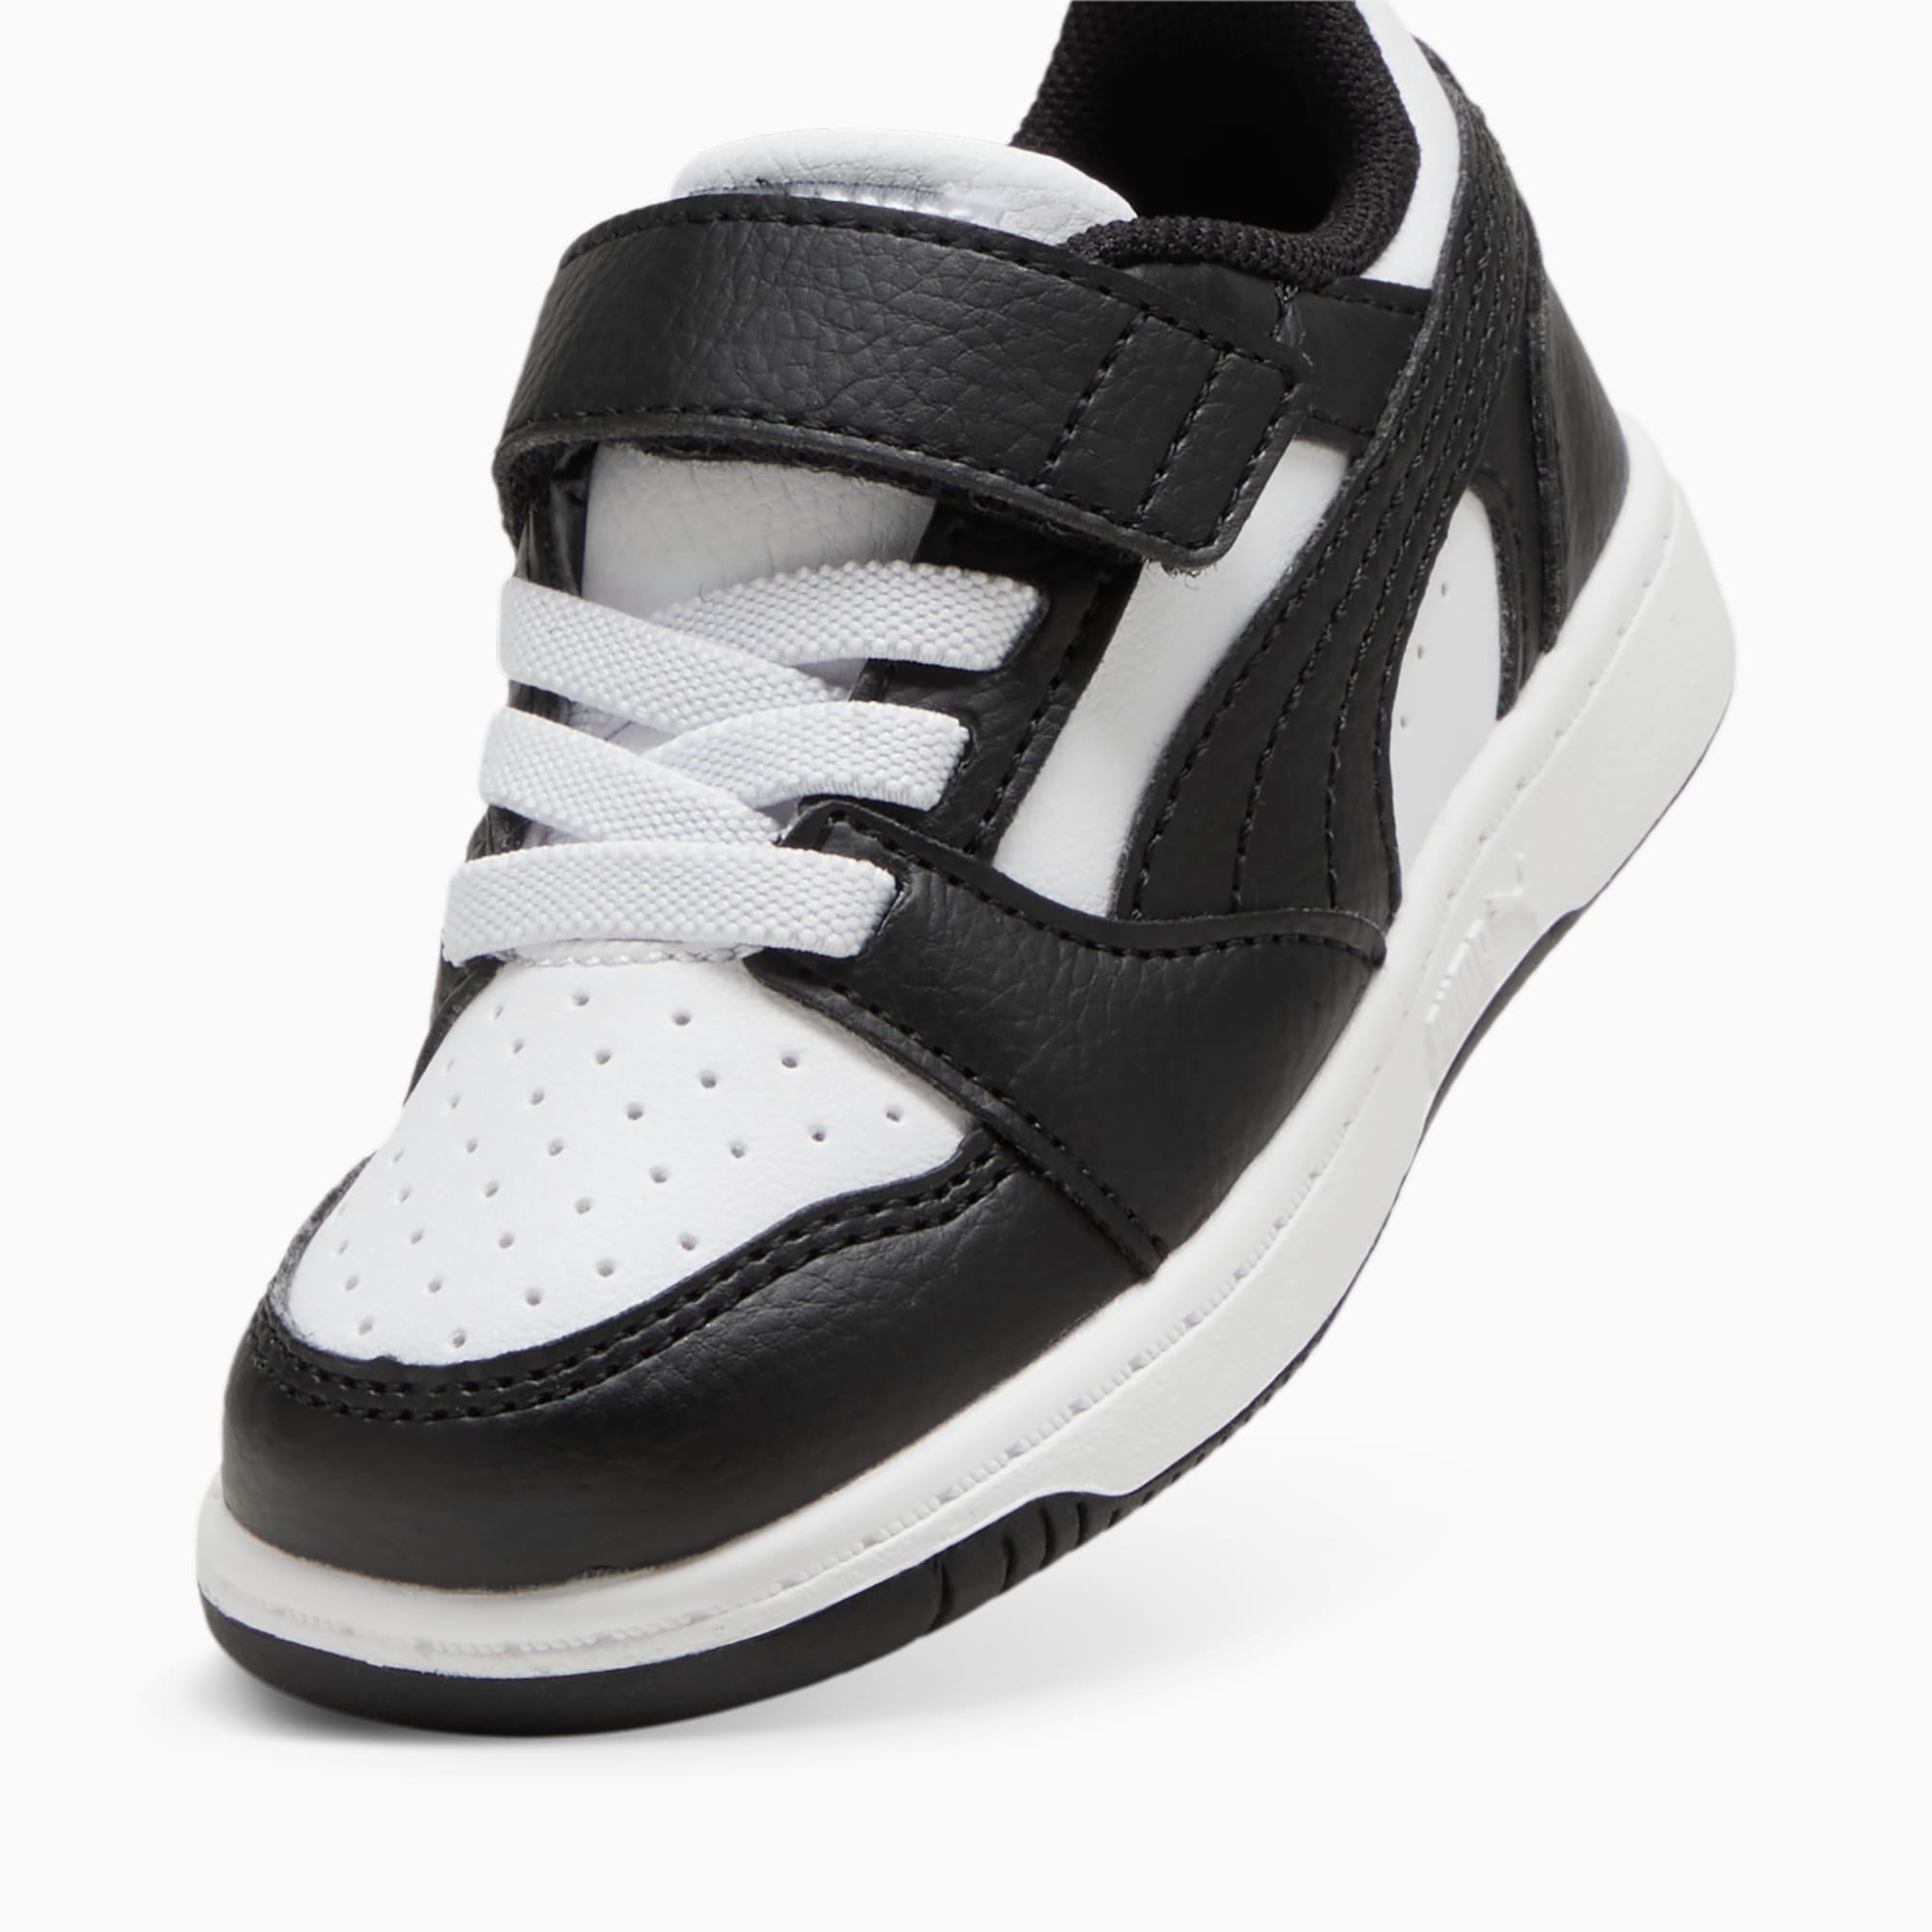 PUMA Rebound V6 Lo Toddlers' Sneakers, White/Black, Size 19, Shoes